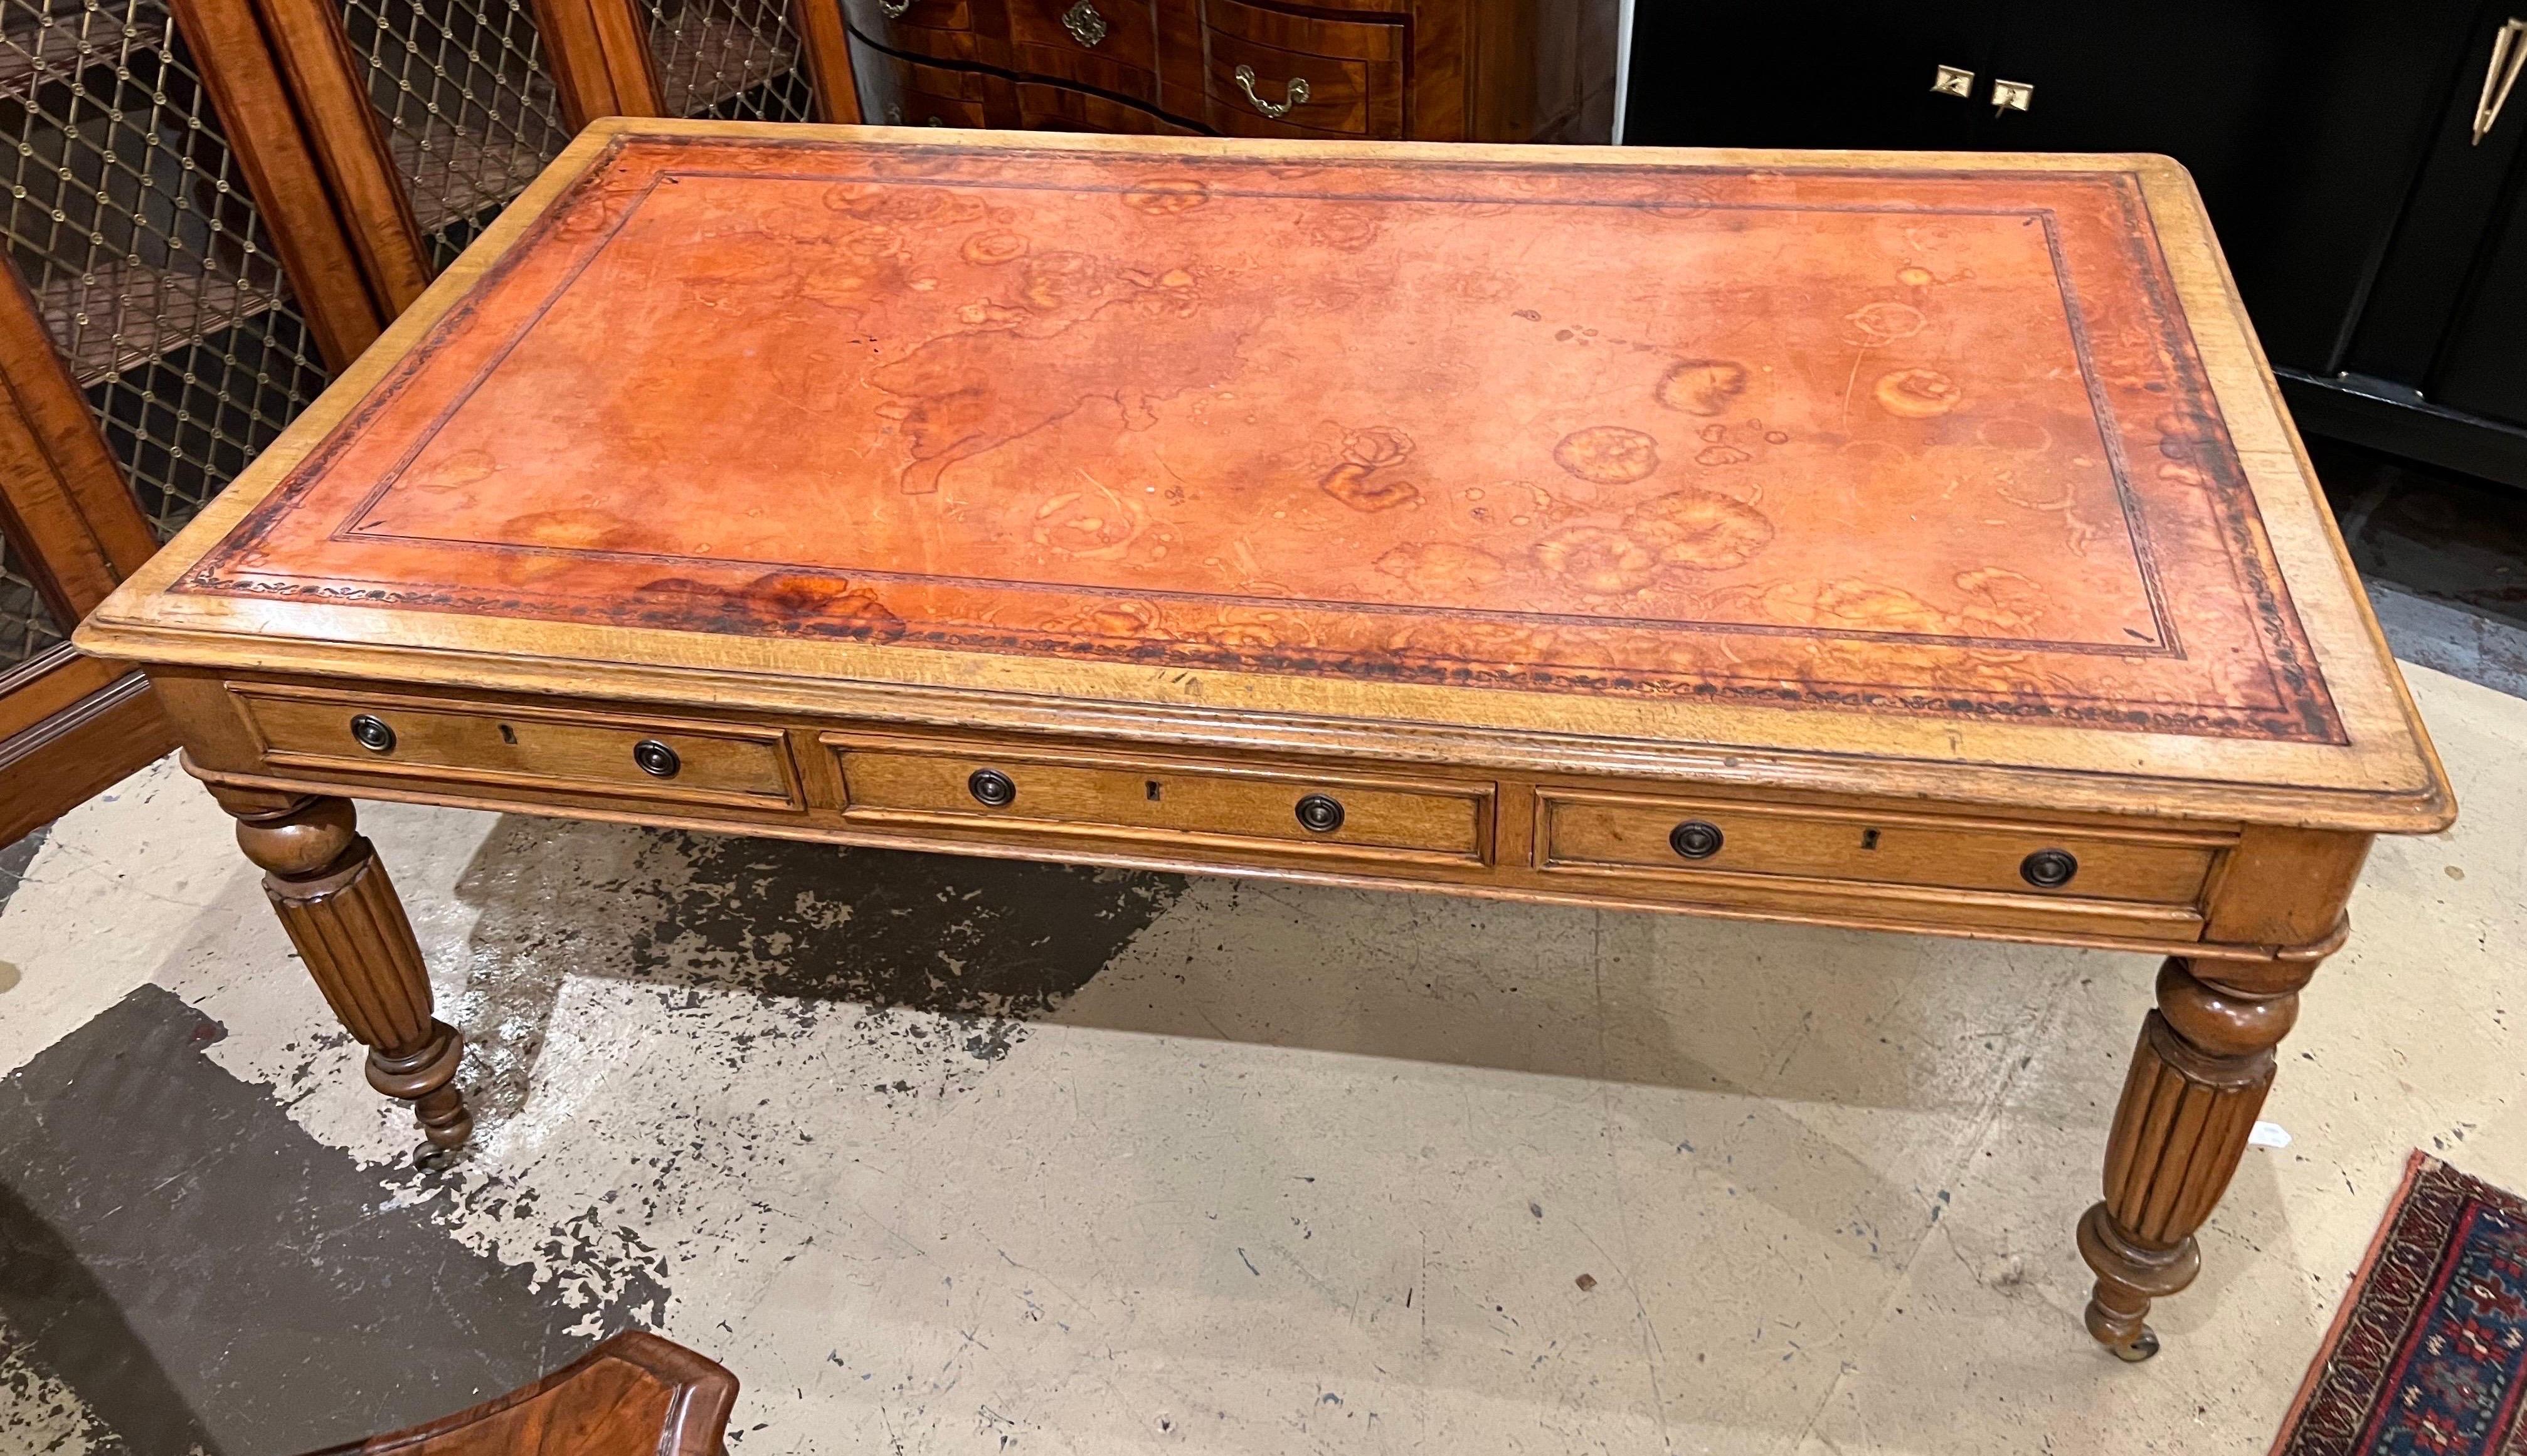 19th century English leather top oak writing table on castors with 3 drawers on both sides. 24” clearance from floor to apron. Wonderful patina to leather from years of use.